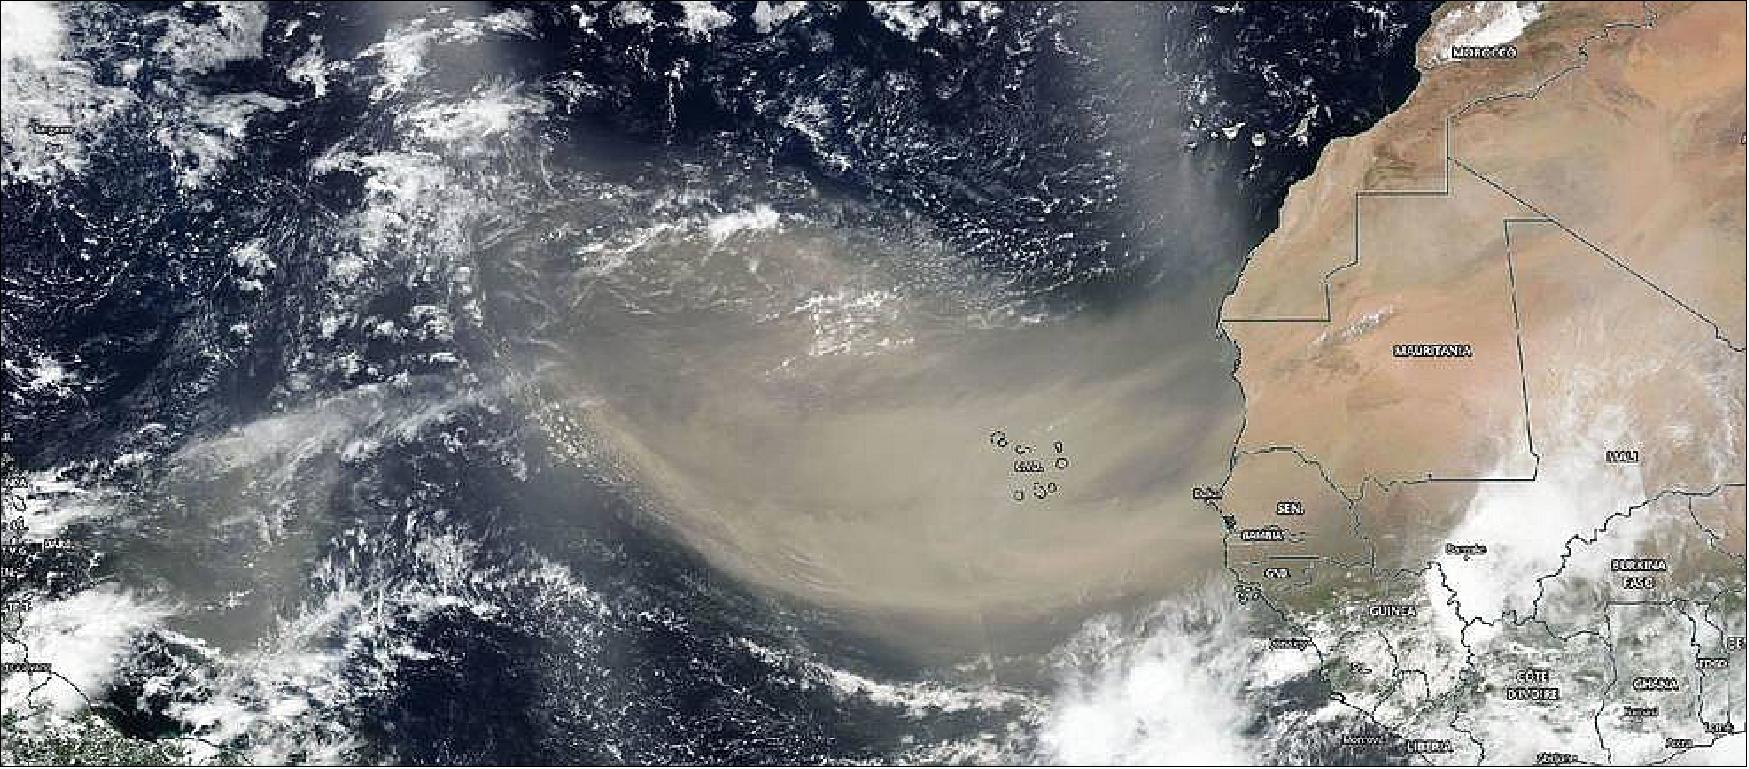 Figure 6: On June 18, 2020, the NASA-NOAA’s Suomi NPP satellite captured this visible image of the large light brown plume of Saharan dust over the North Atlantic Ocean. The image showed that the dust from Africa’s west coast extended almost to the Lesser Antilles in the western North Atlantic Ocean (image credit: NASA Worldview)